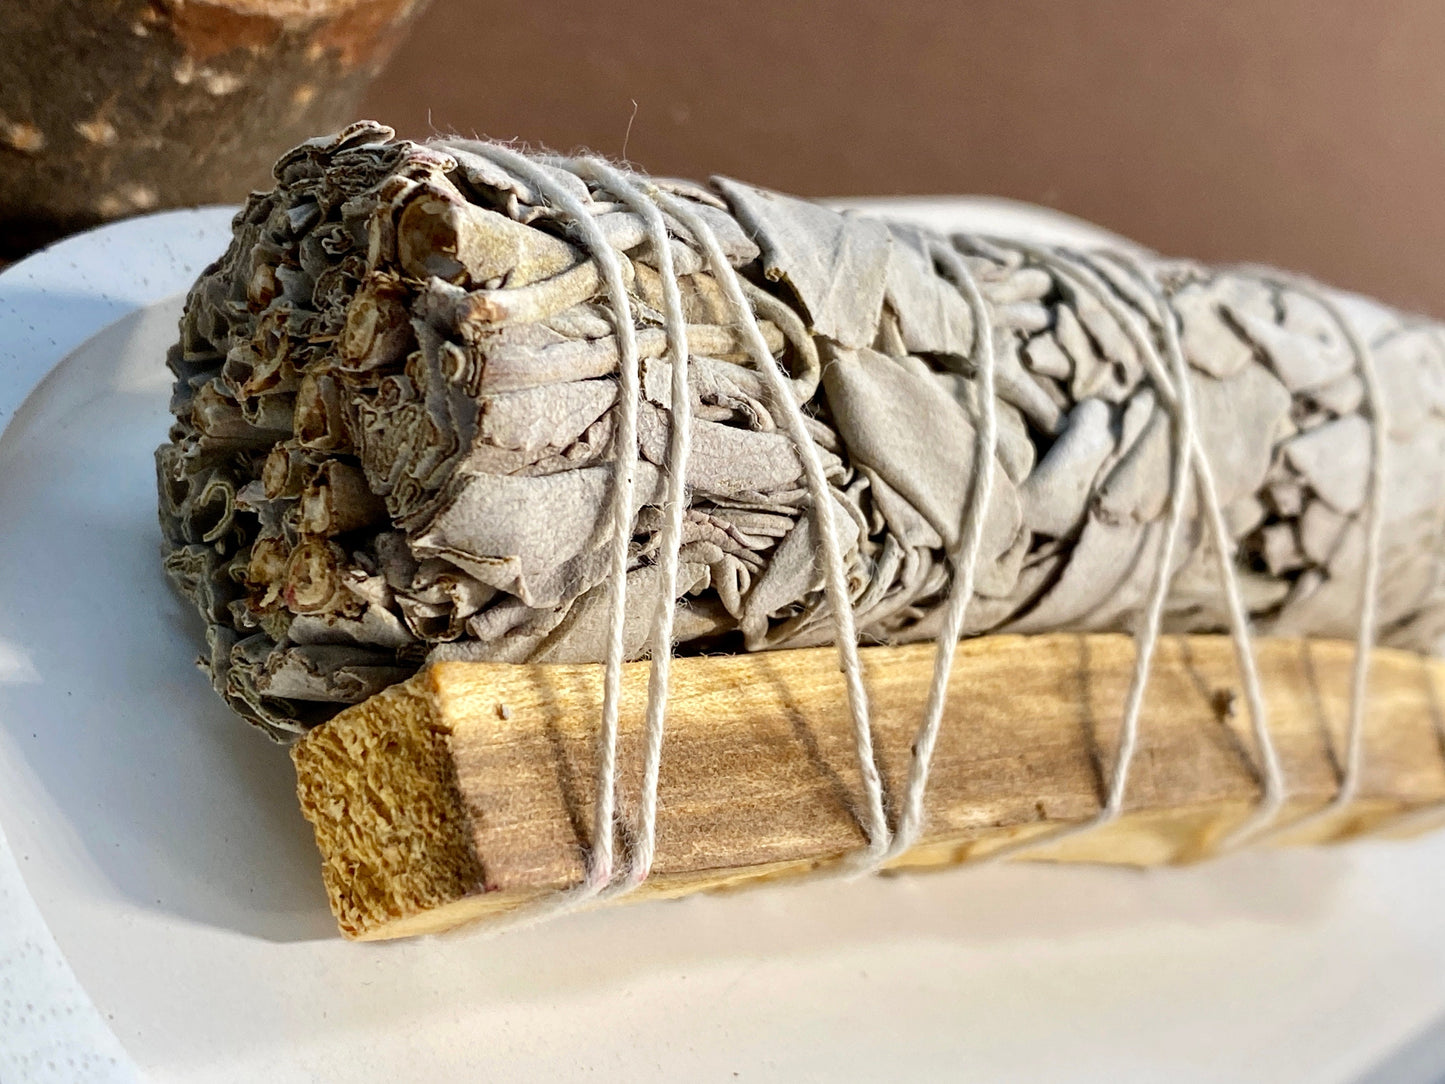 Sage Smudge Stick with Palo Santo, Cleanse your home, crystals, Release negativity, Attract good vibes and abundance